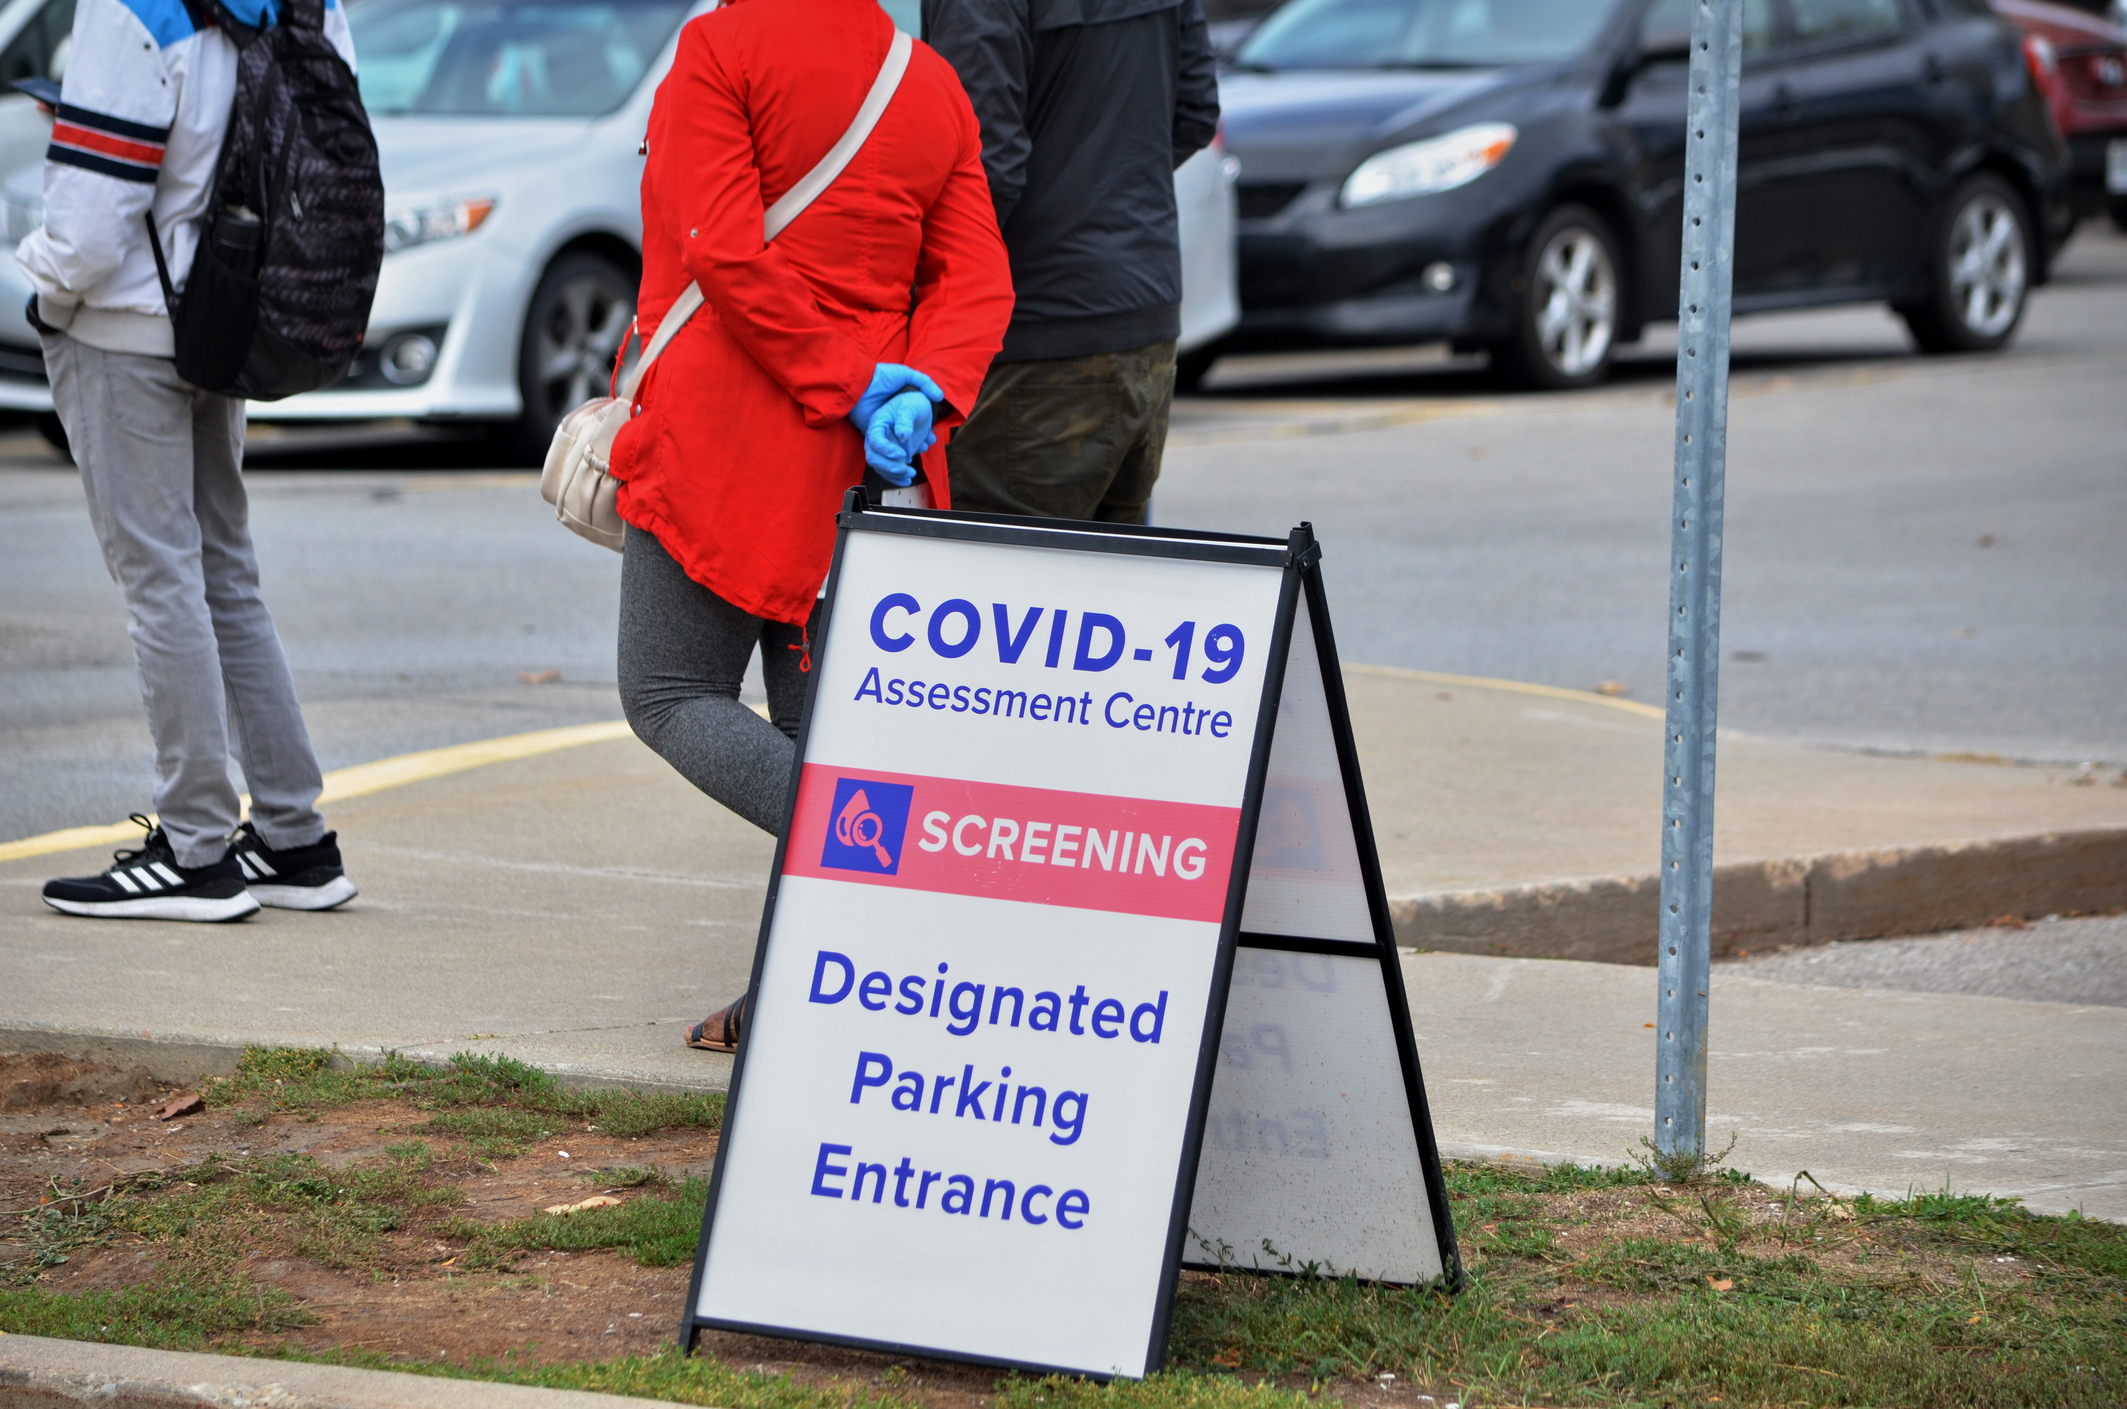 Scarborough, Ontario, Canada, September 29, 2020: People wait in line for a Covid-19 test at the Birchmount Covid-19 Assessment Centre at 3030 Birchmount Road in Scarborough, Ontario.